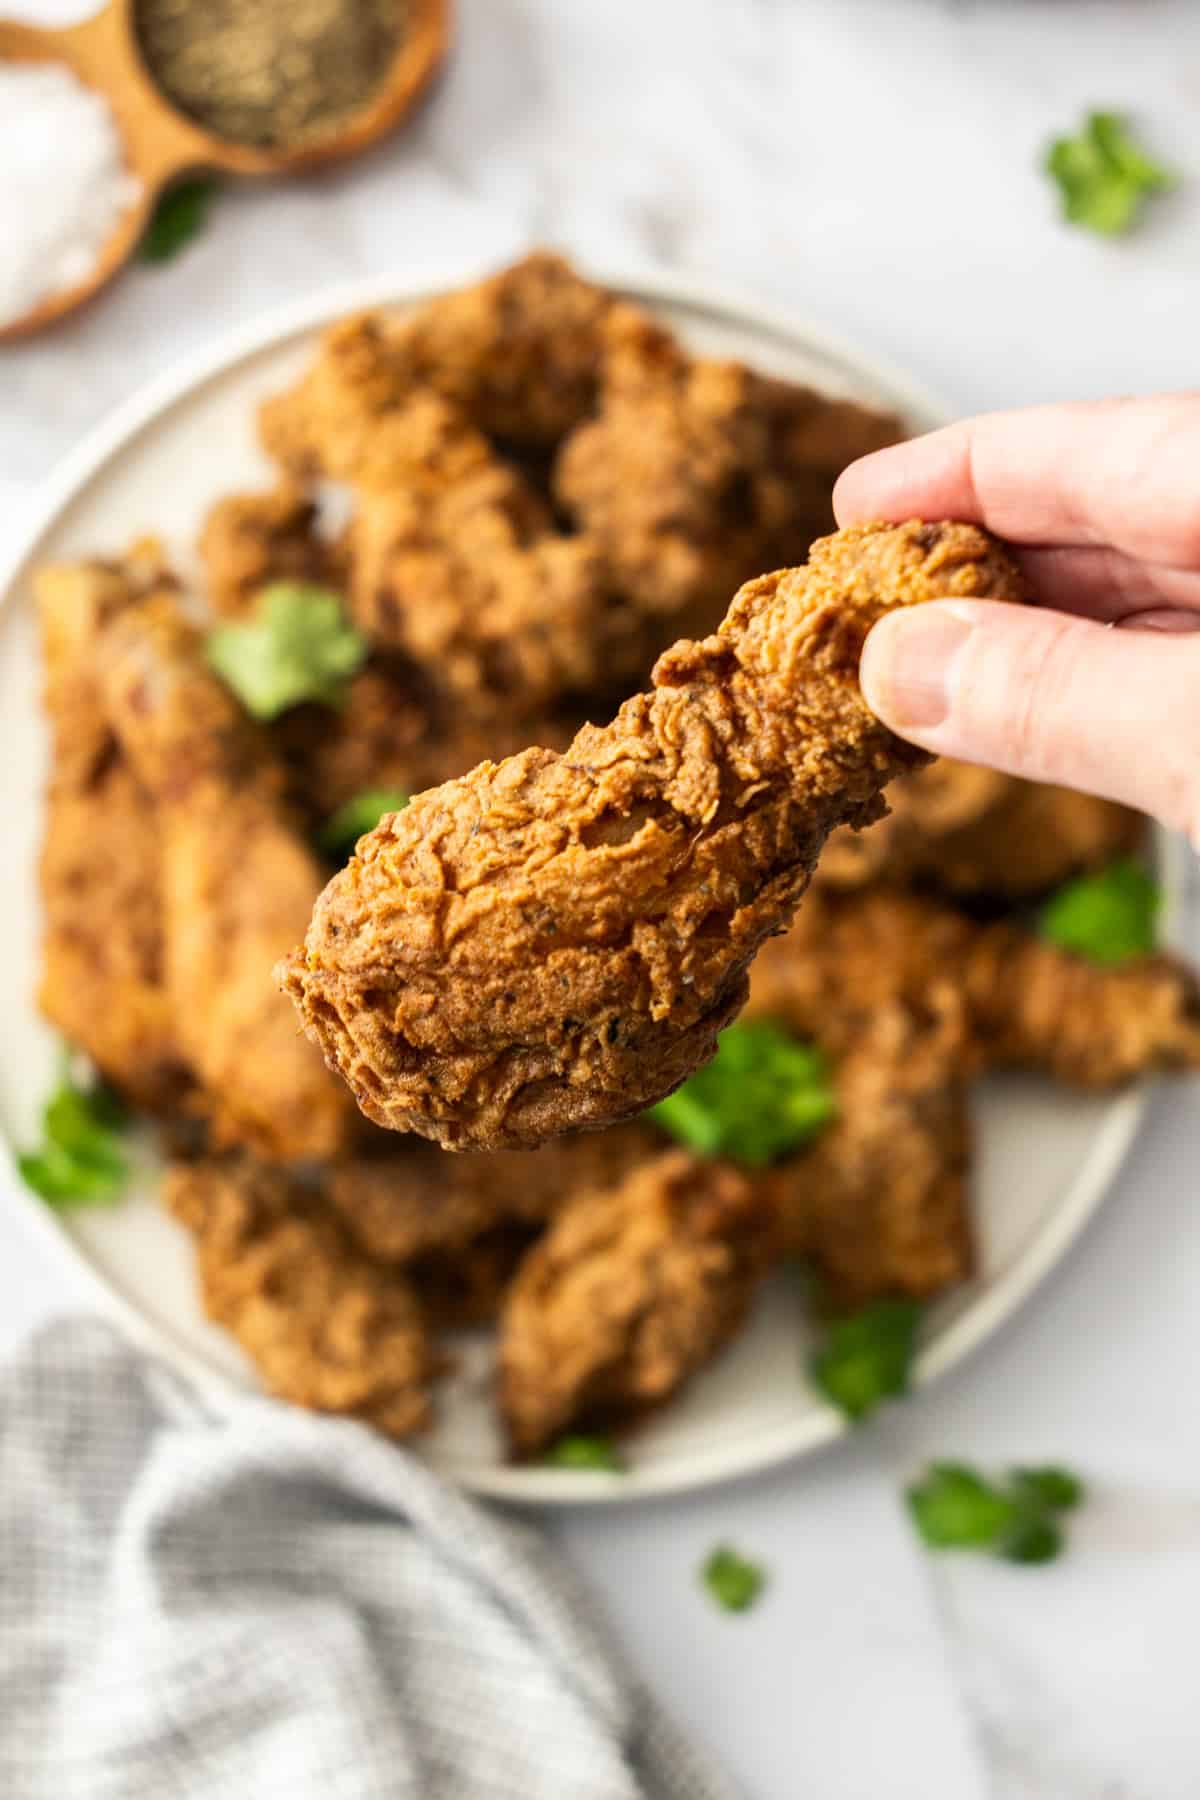 a hand, holding a fried chicken drumstick over a plate of fried chicken.